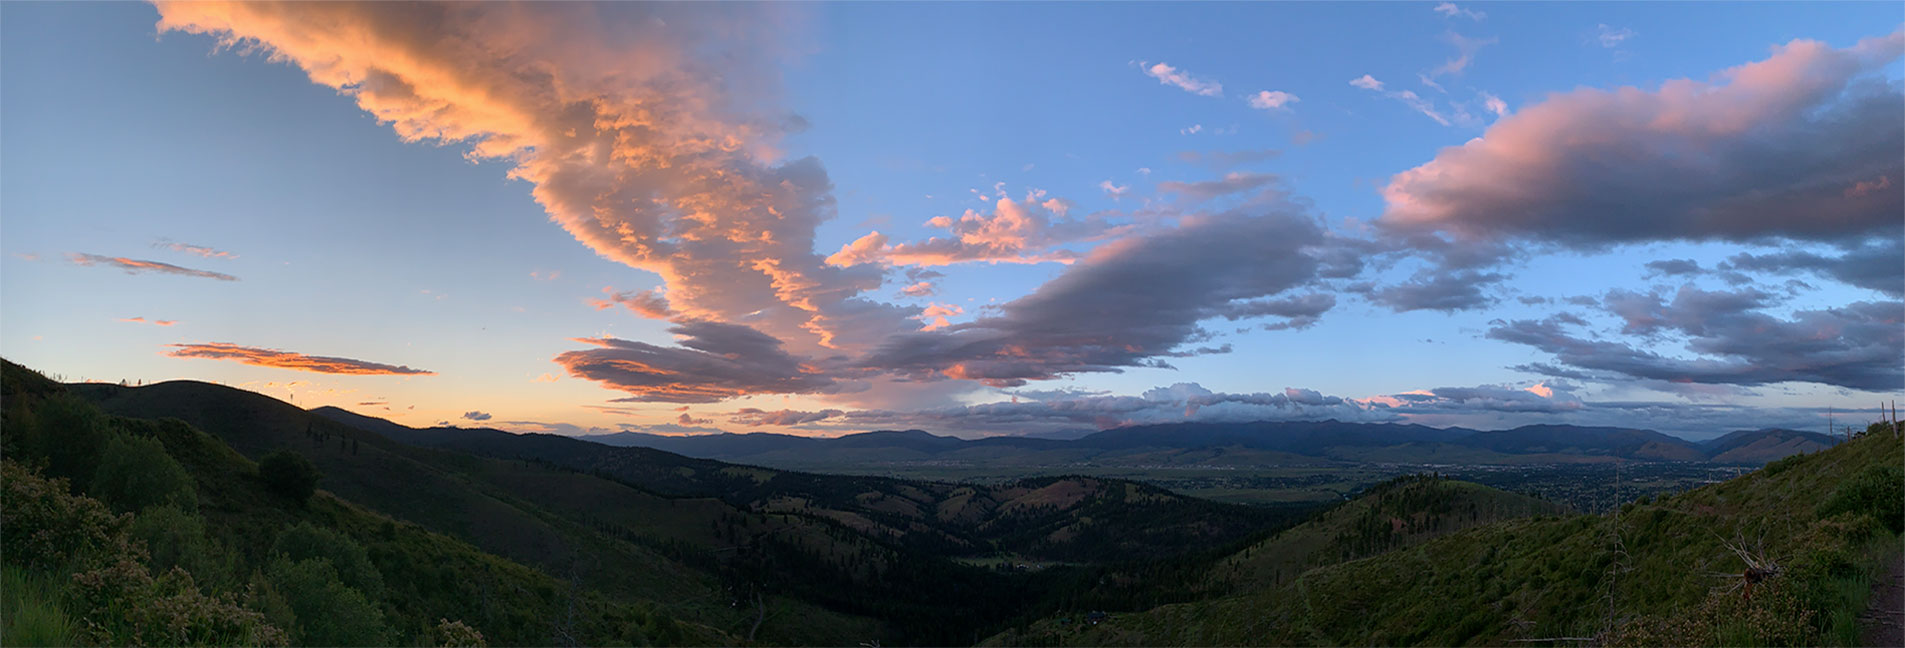 View from Blue Mountain in Missoula, Montana